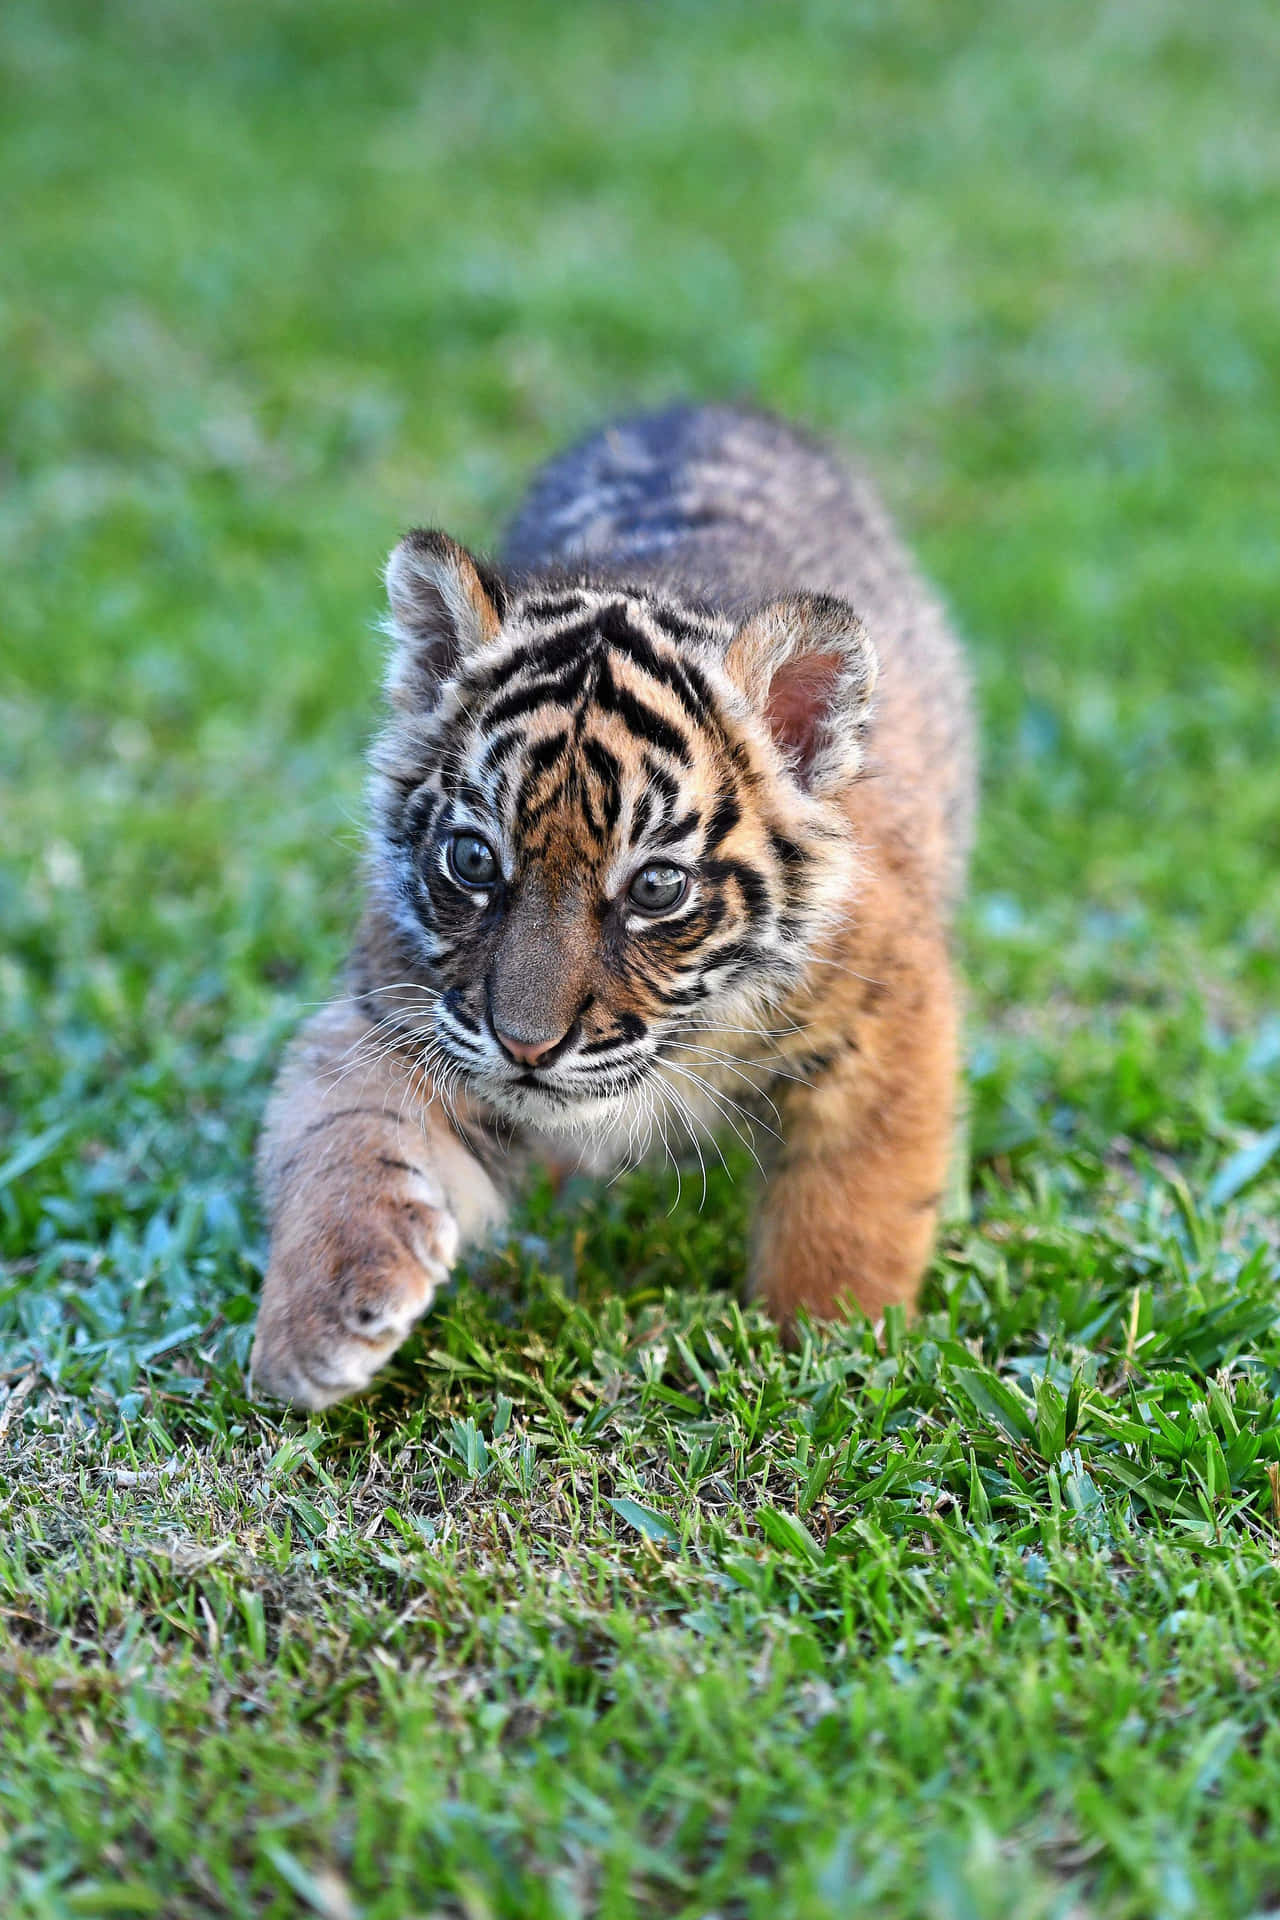 Cute Baby Tiger Looking Up